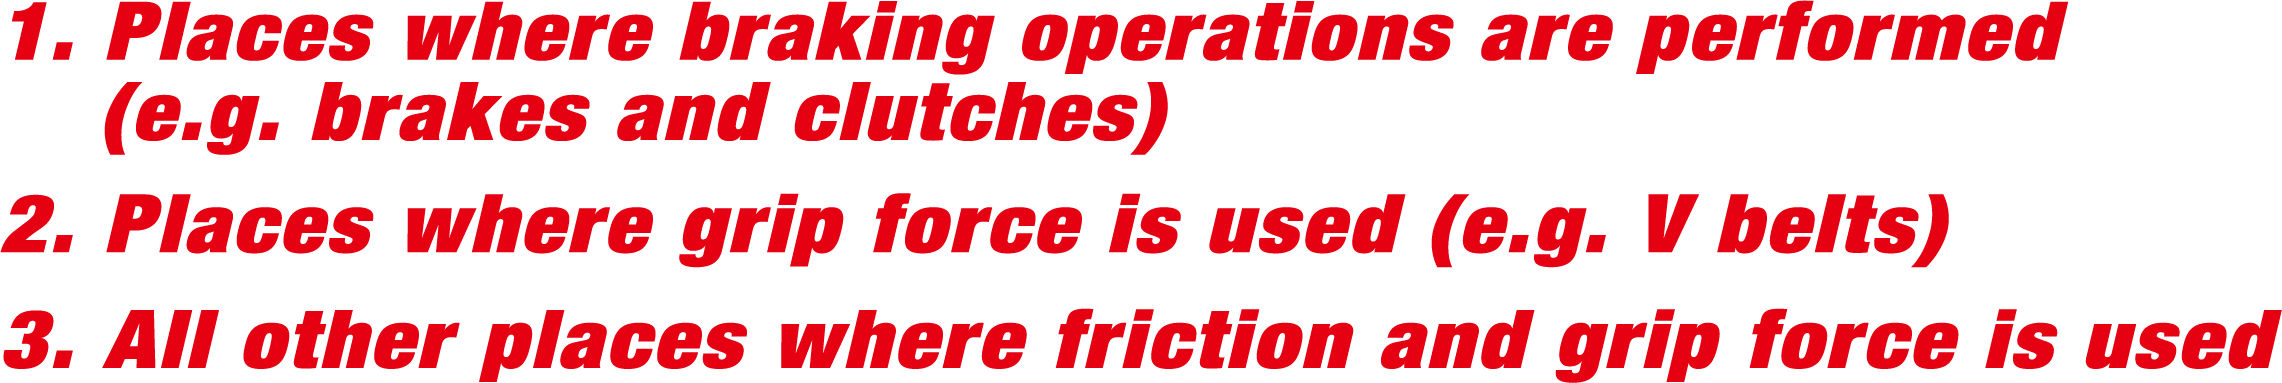 1.Places where braking operations are performed (e.g. brakes and clutches). 2.Places where grip force is used (e.g. V belts).3.All other places where friction and grip force is used.